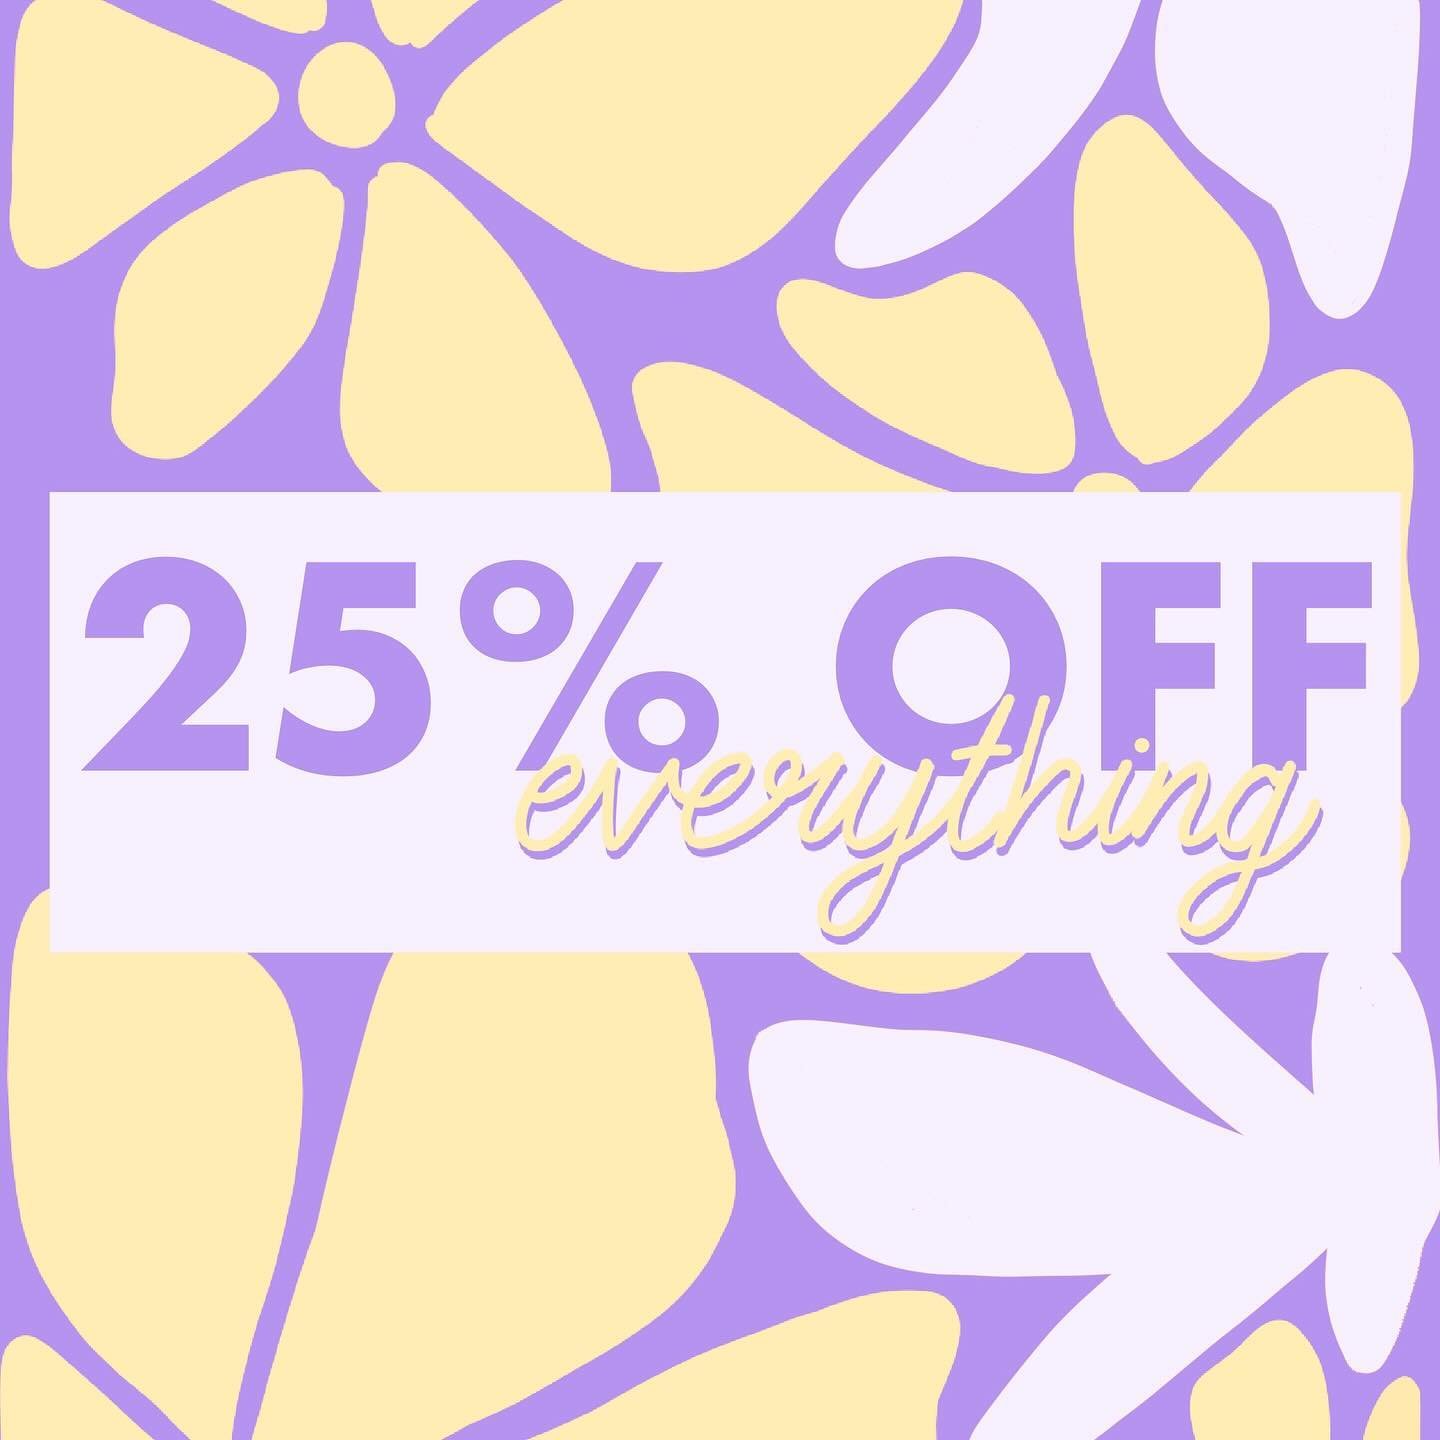 NEW ART 👩🏼&zwj;🎨 And&hellip; 25% OFF 💸 Head over to our website and check out our brand new prints and save 25% across the entire store using code 25OFF ✌🏼 (you can also get free shipping on orders over &pound;20 using code FREESHIPPING 📬 Let u